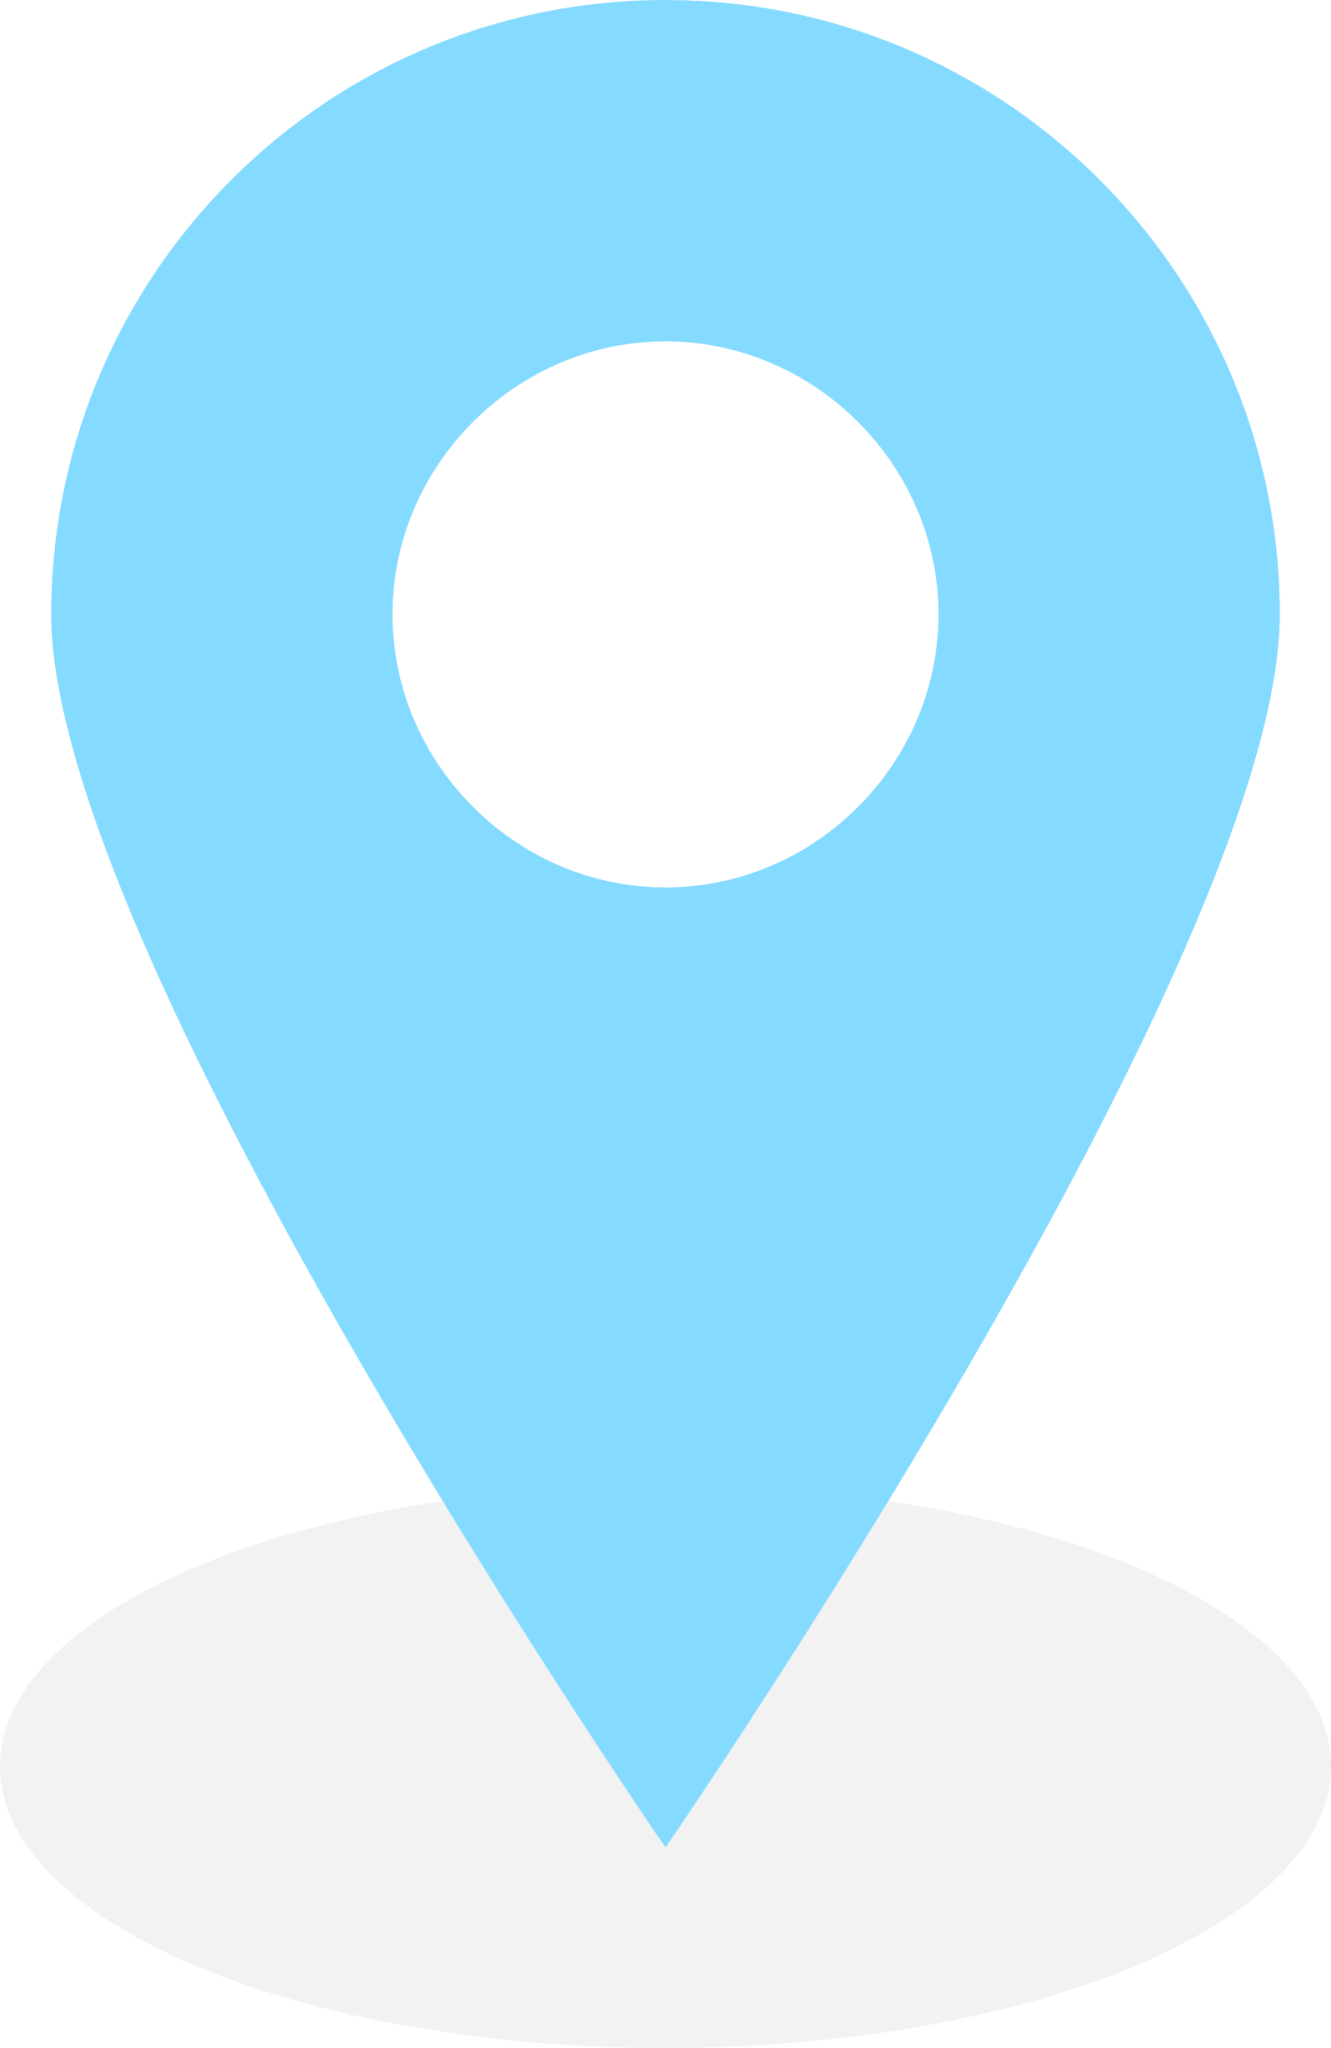 placeholder icon